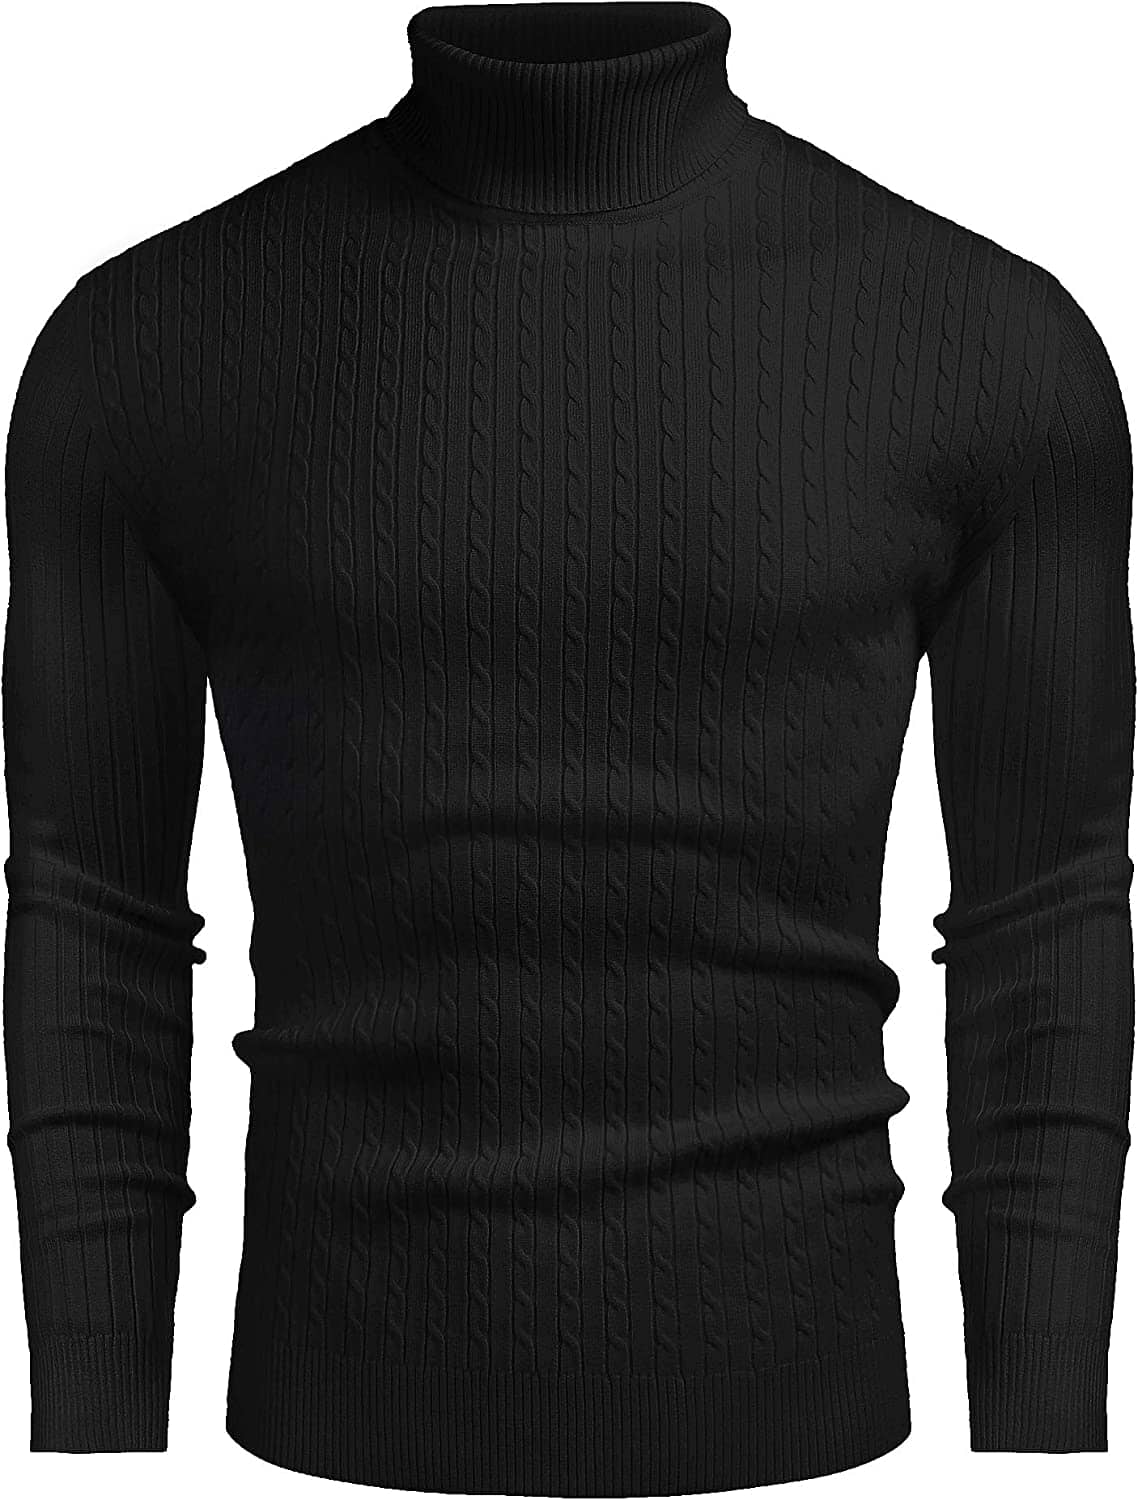 Twist Patterned Pullover Knitted Sweater (US Only) Sweater COOFANDY Store Black XS 